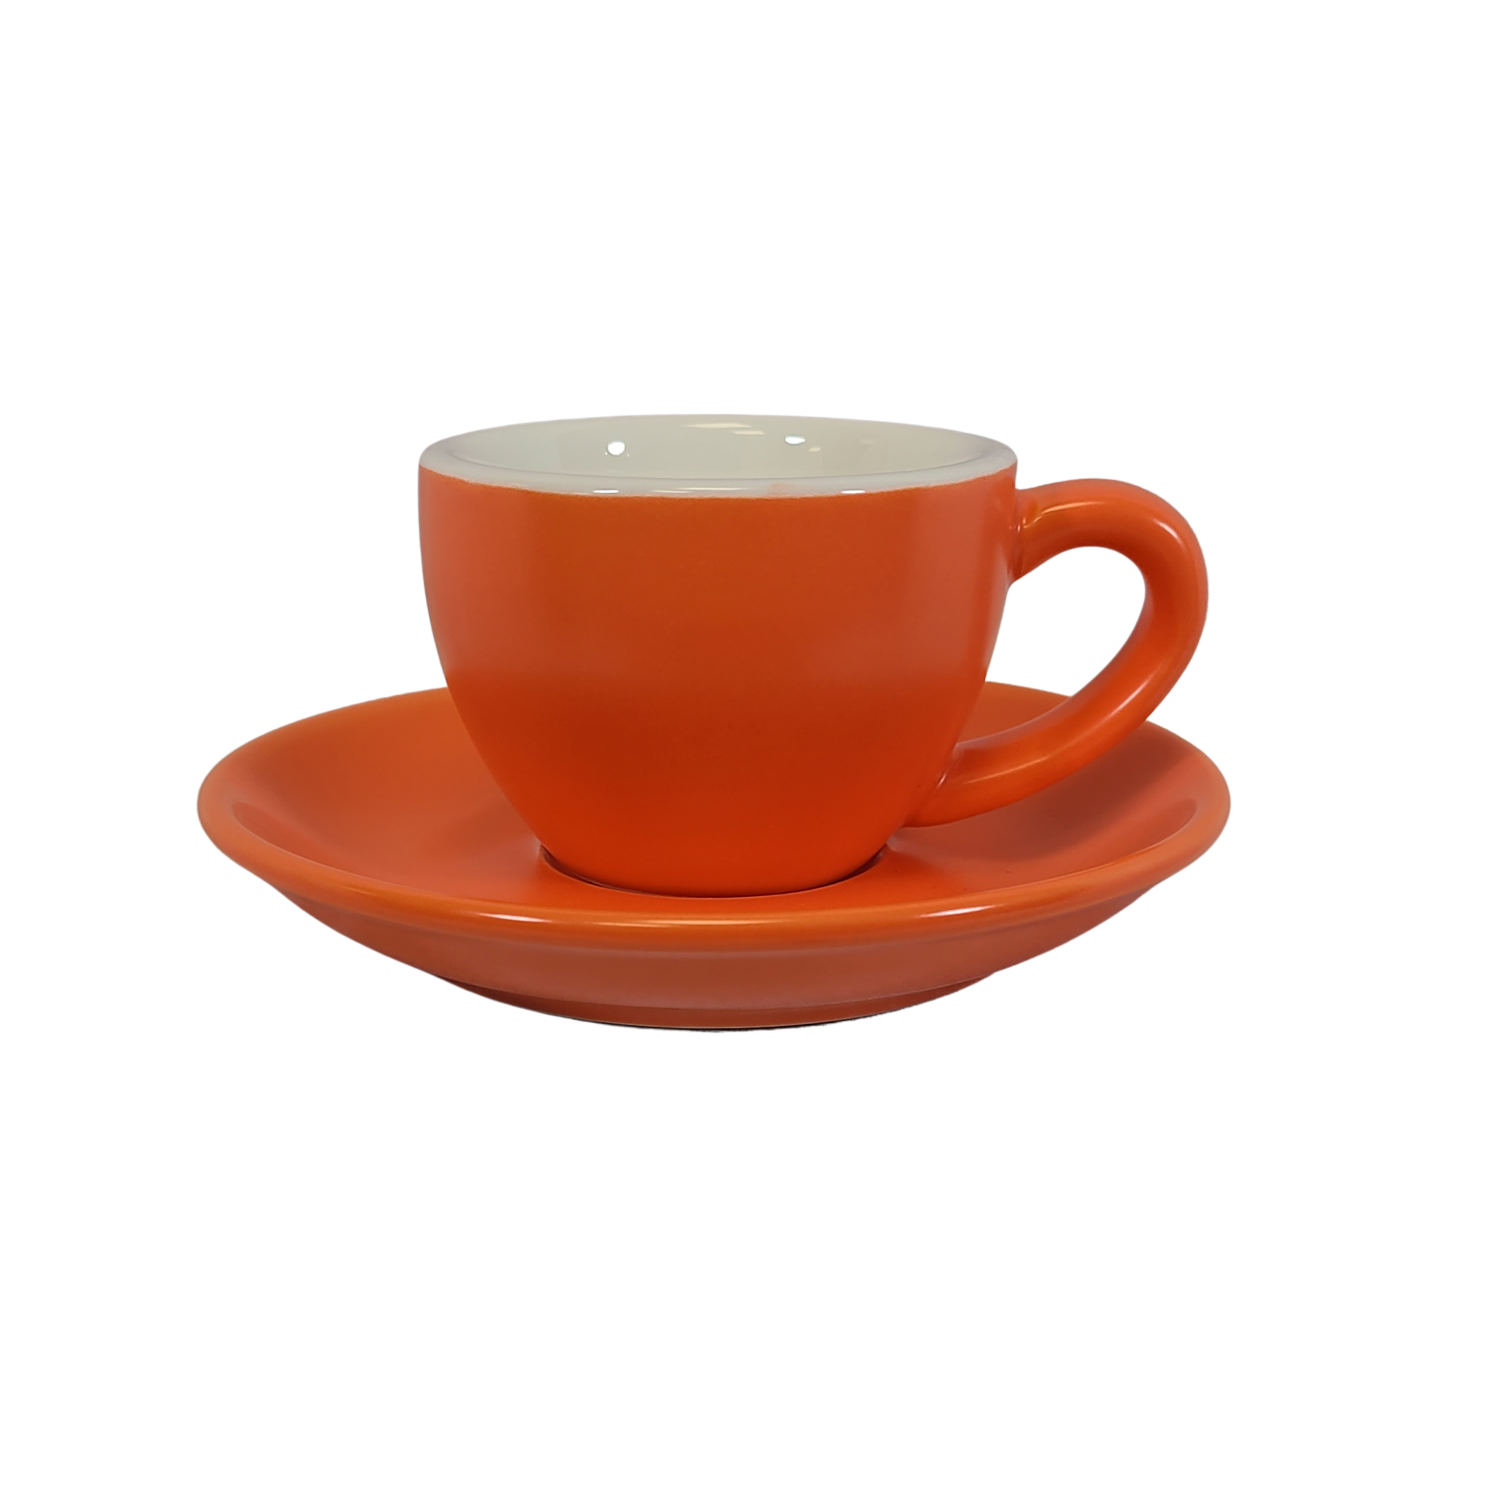 Coffee Addicts commercial ceramic cup with saucer in matte orange espresso cup 2.7oz 80ml